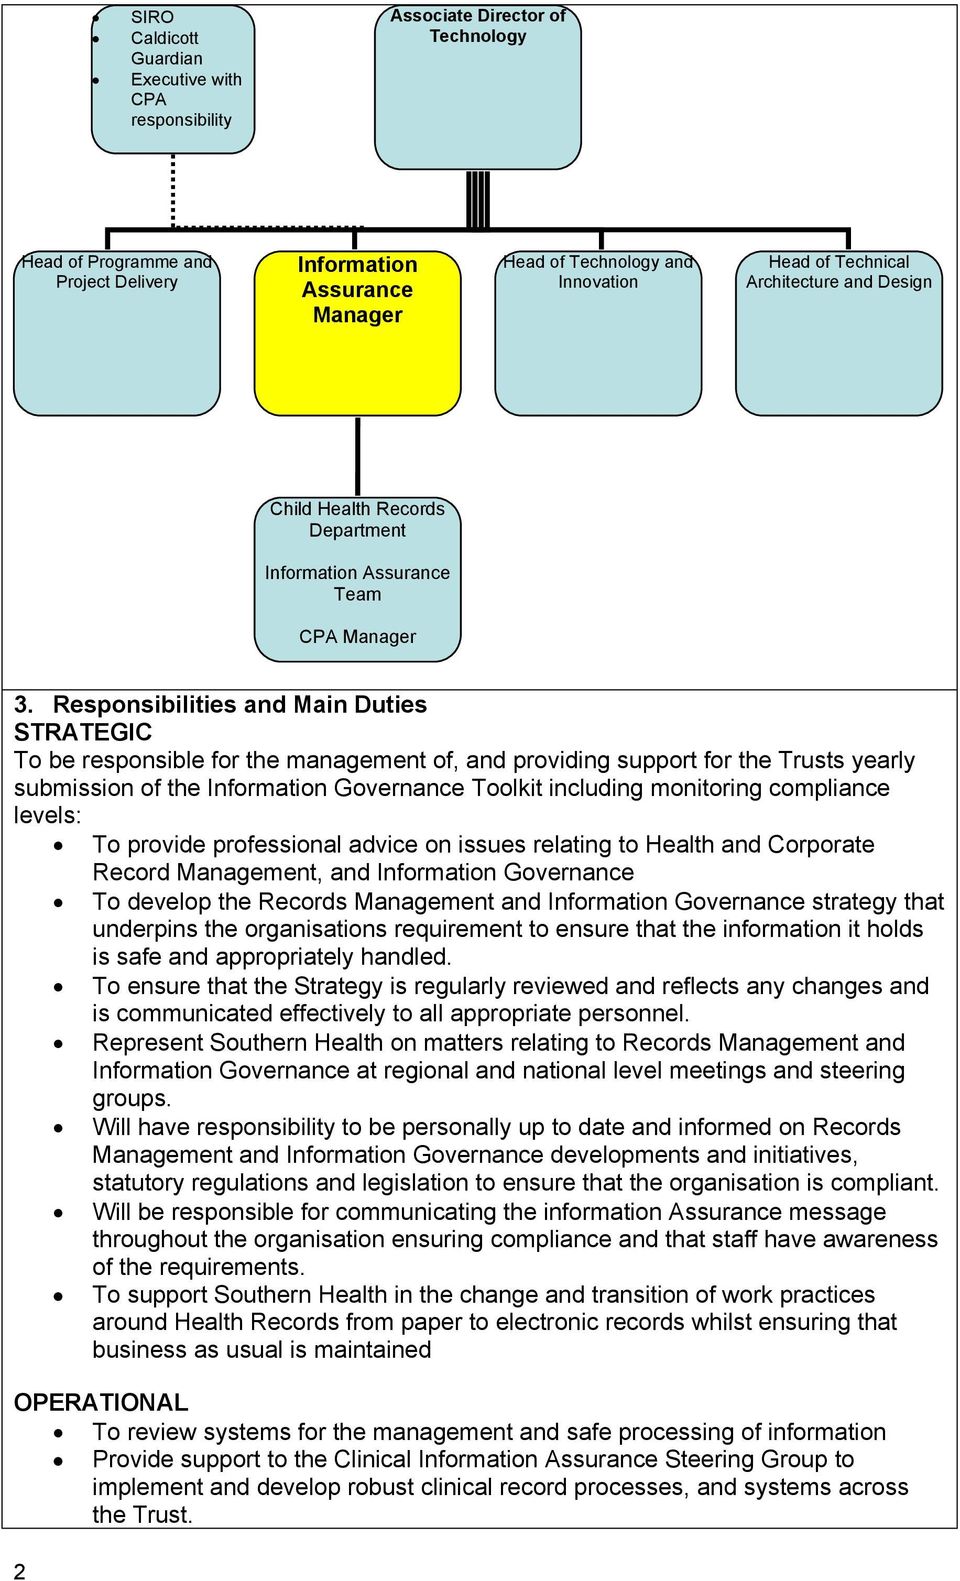 Responsibilities and Main Duties STRATEGIC To be responsible for the management of, and providing support for the Trusts yearly submission of the Information Governance Toolkit including monitoring